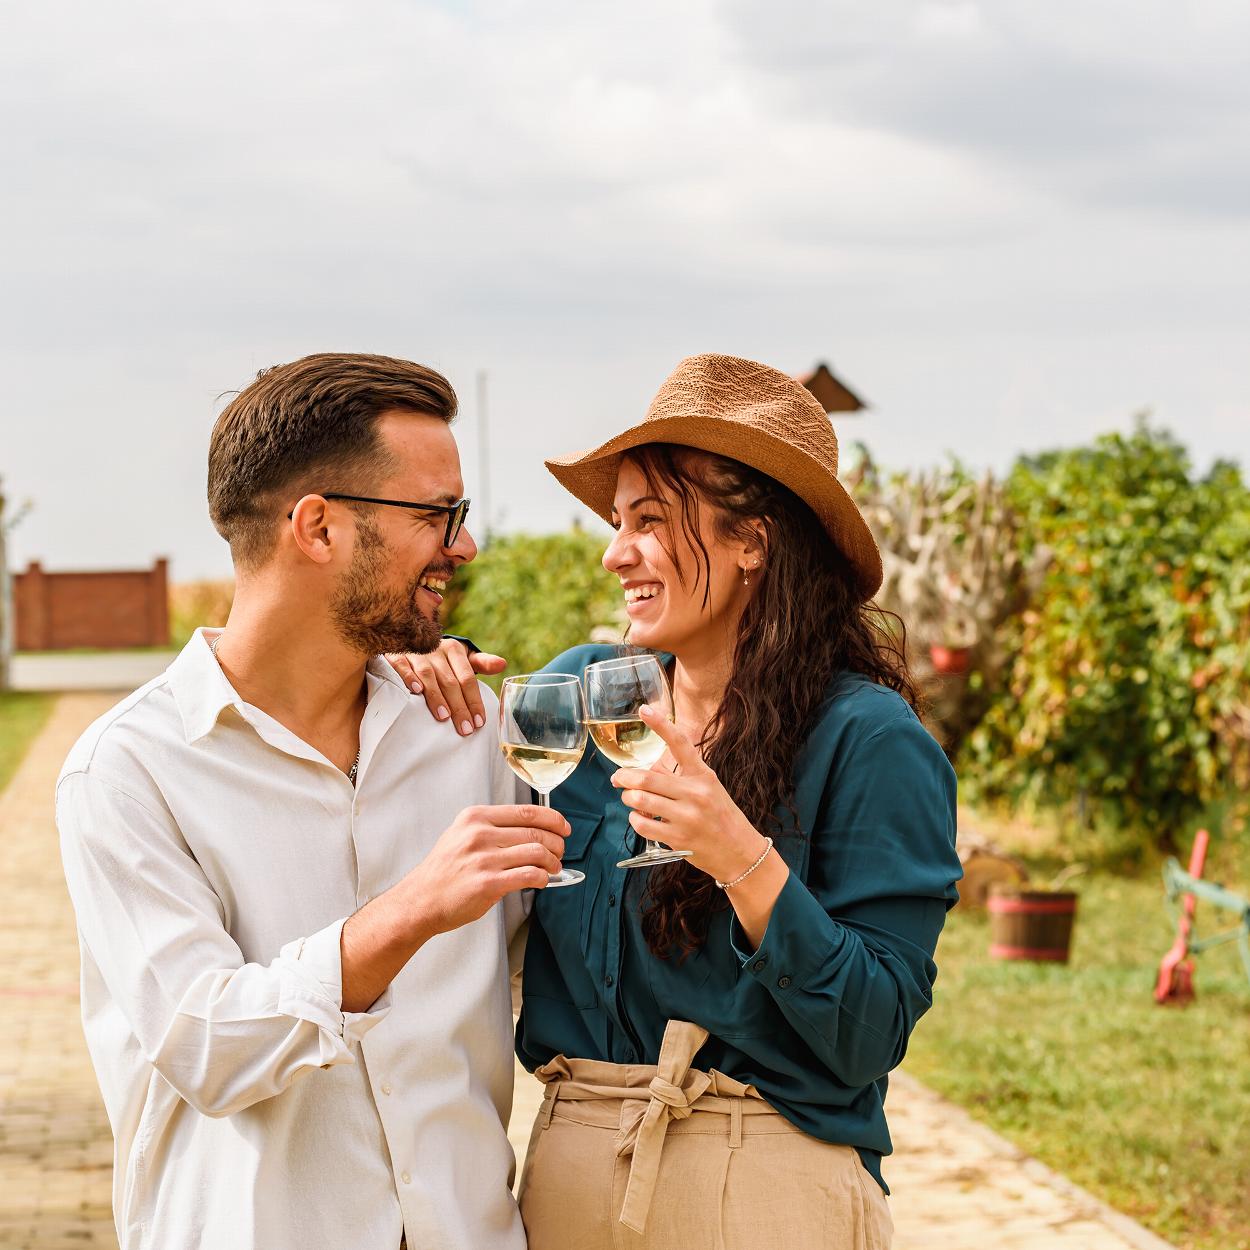 Couple at vineyard in South Africa